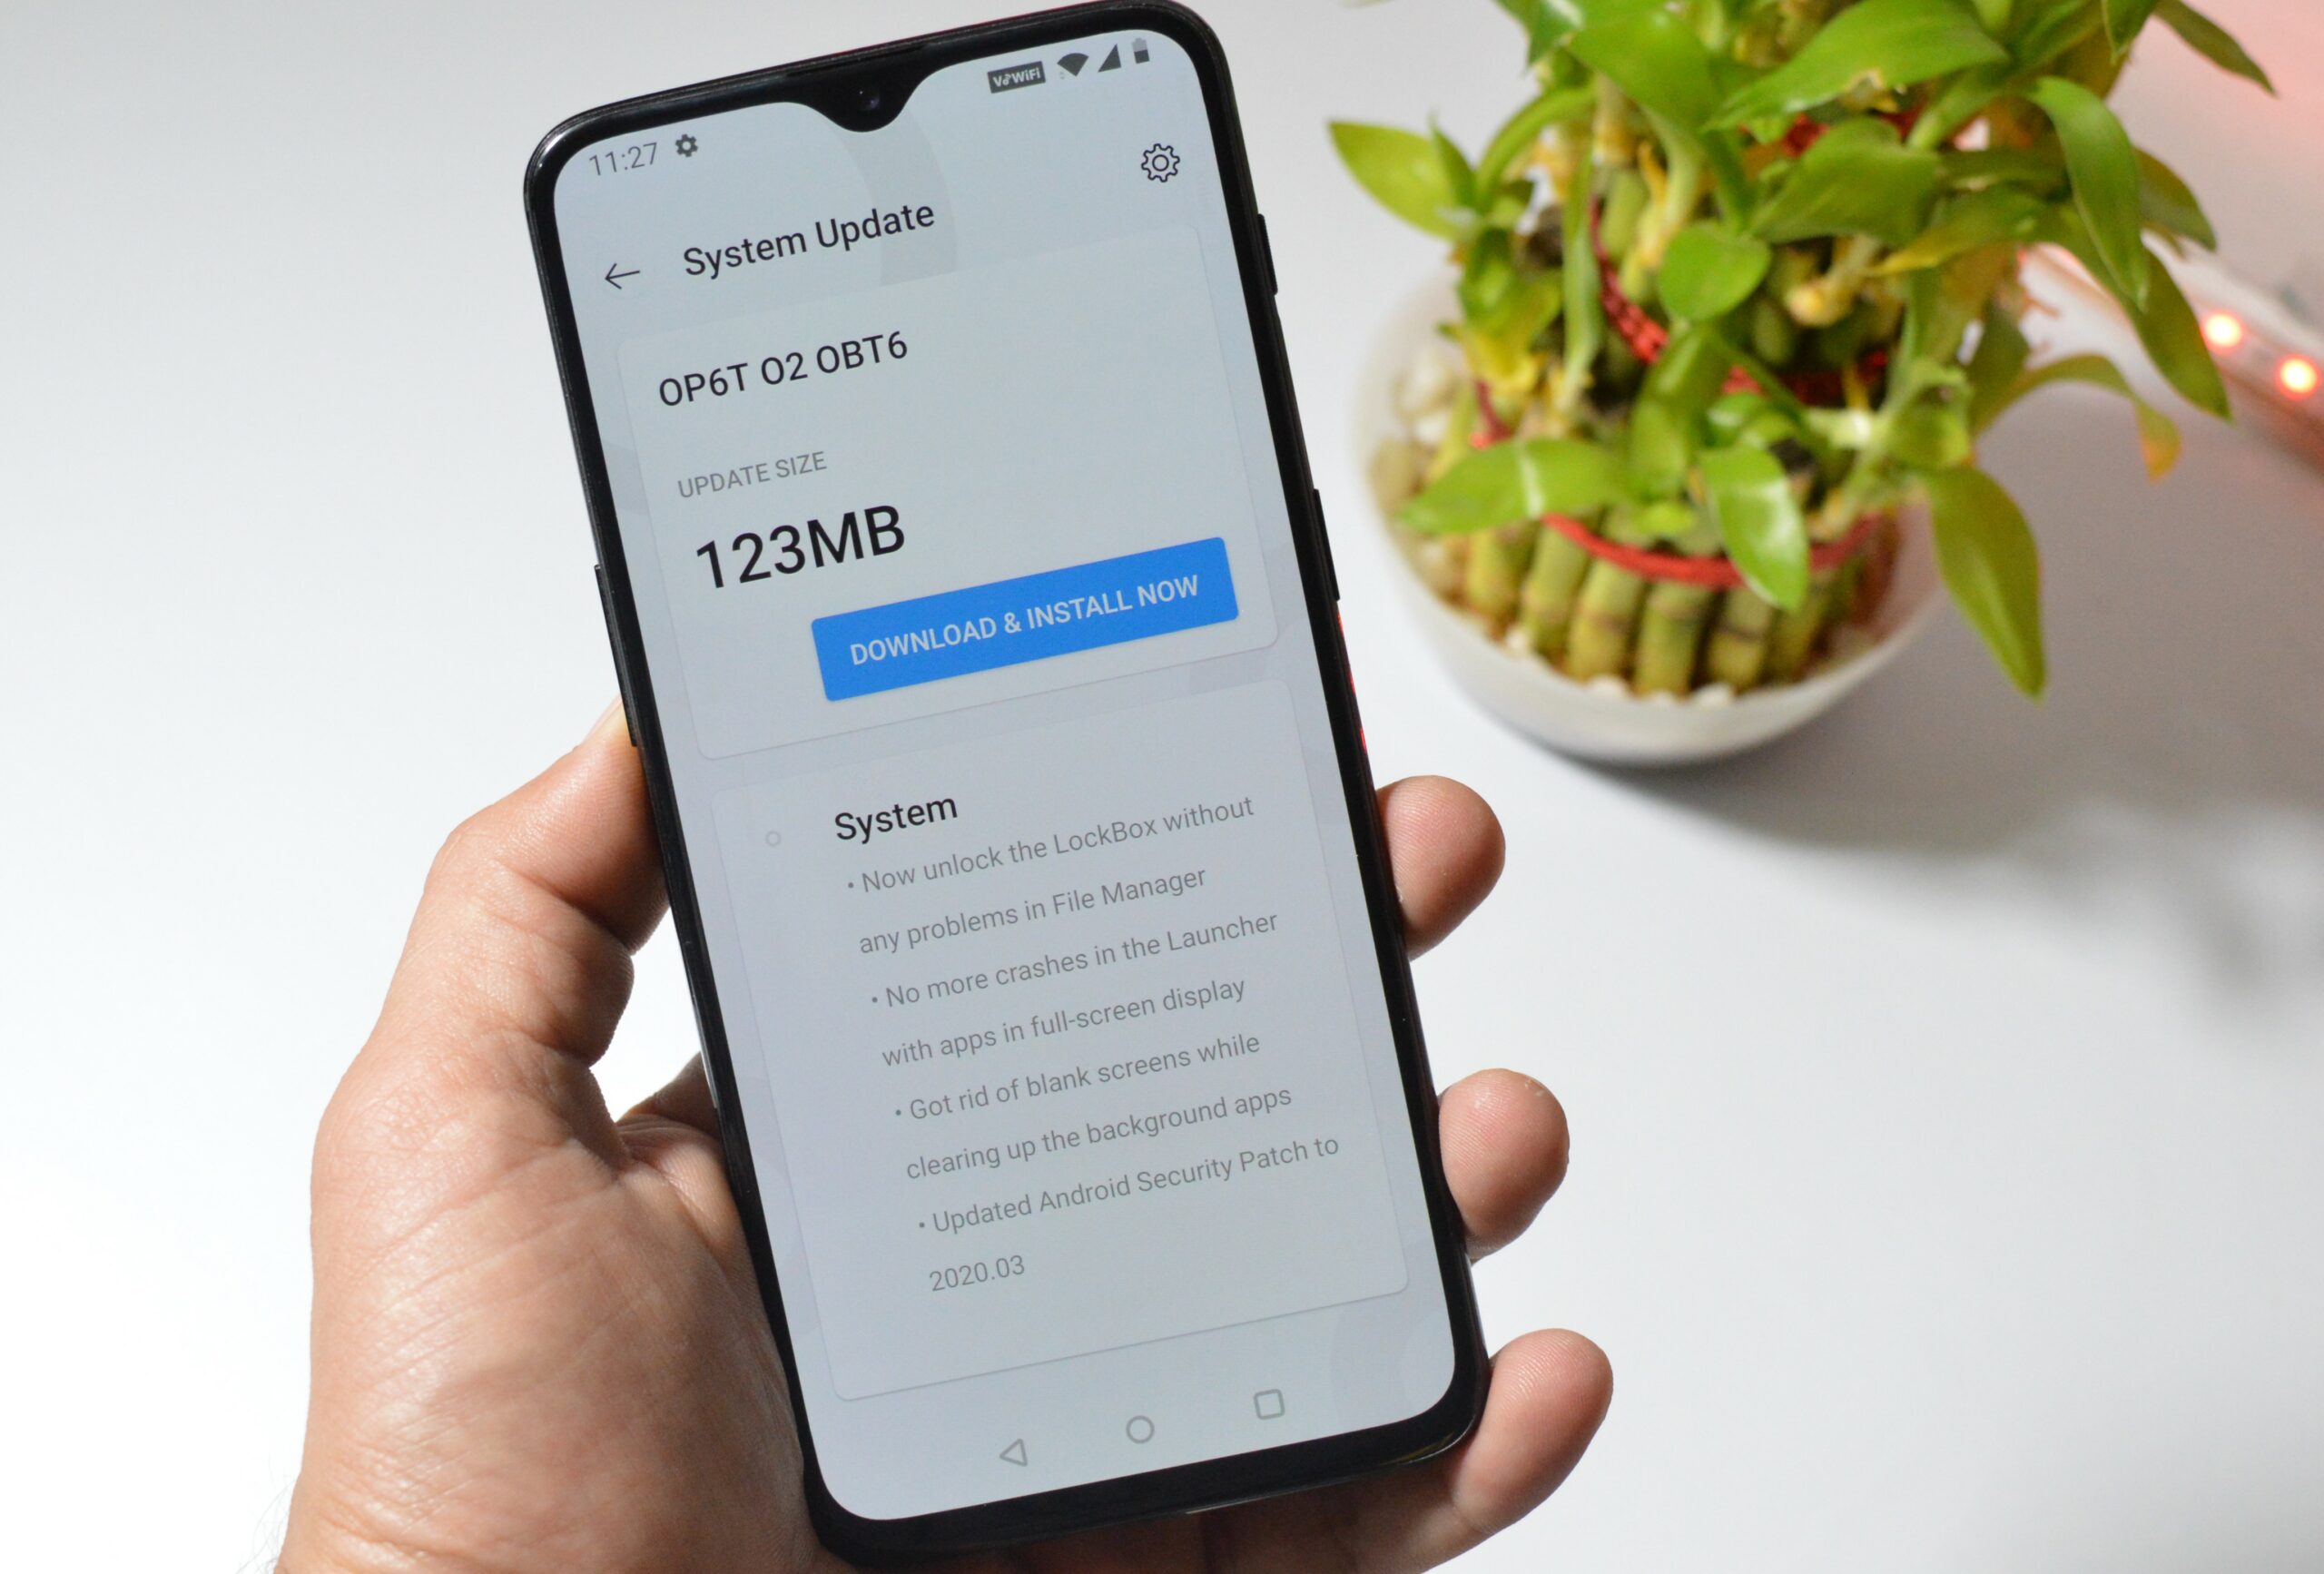 OxygenOS Open Beta 6 with March 2020 patches and Launcher fixes for OnePlus 6 and 6T